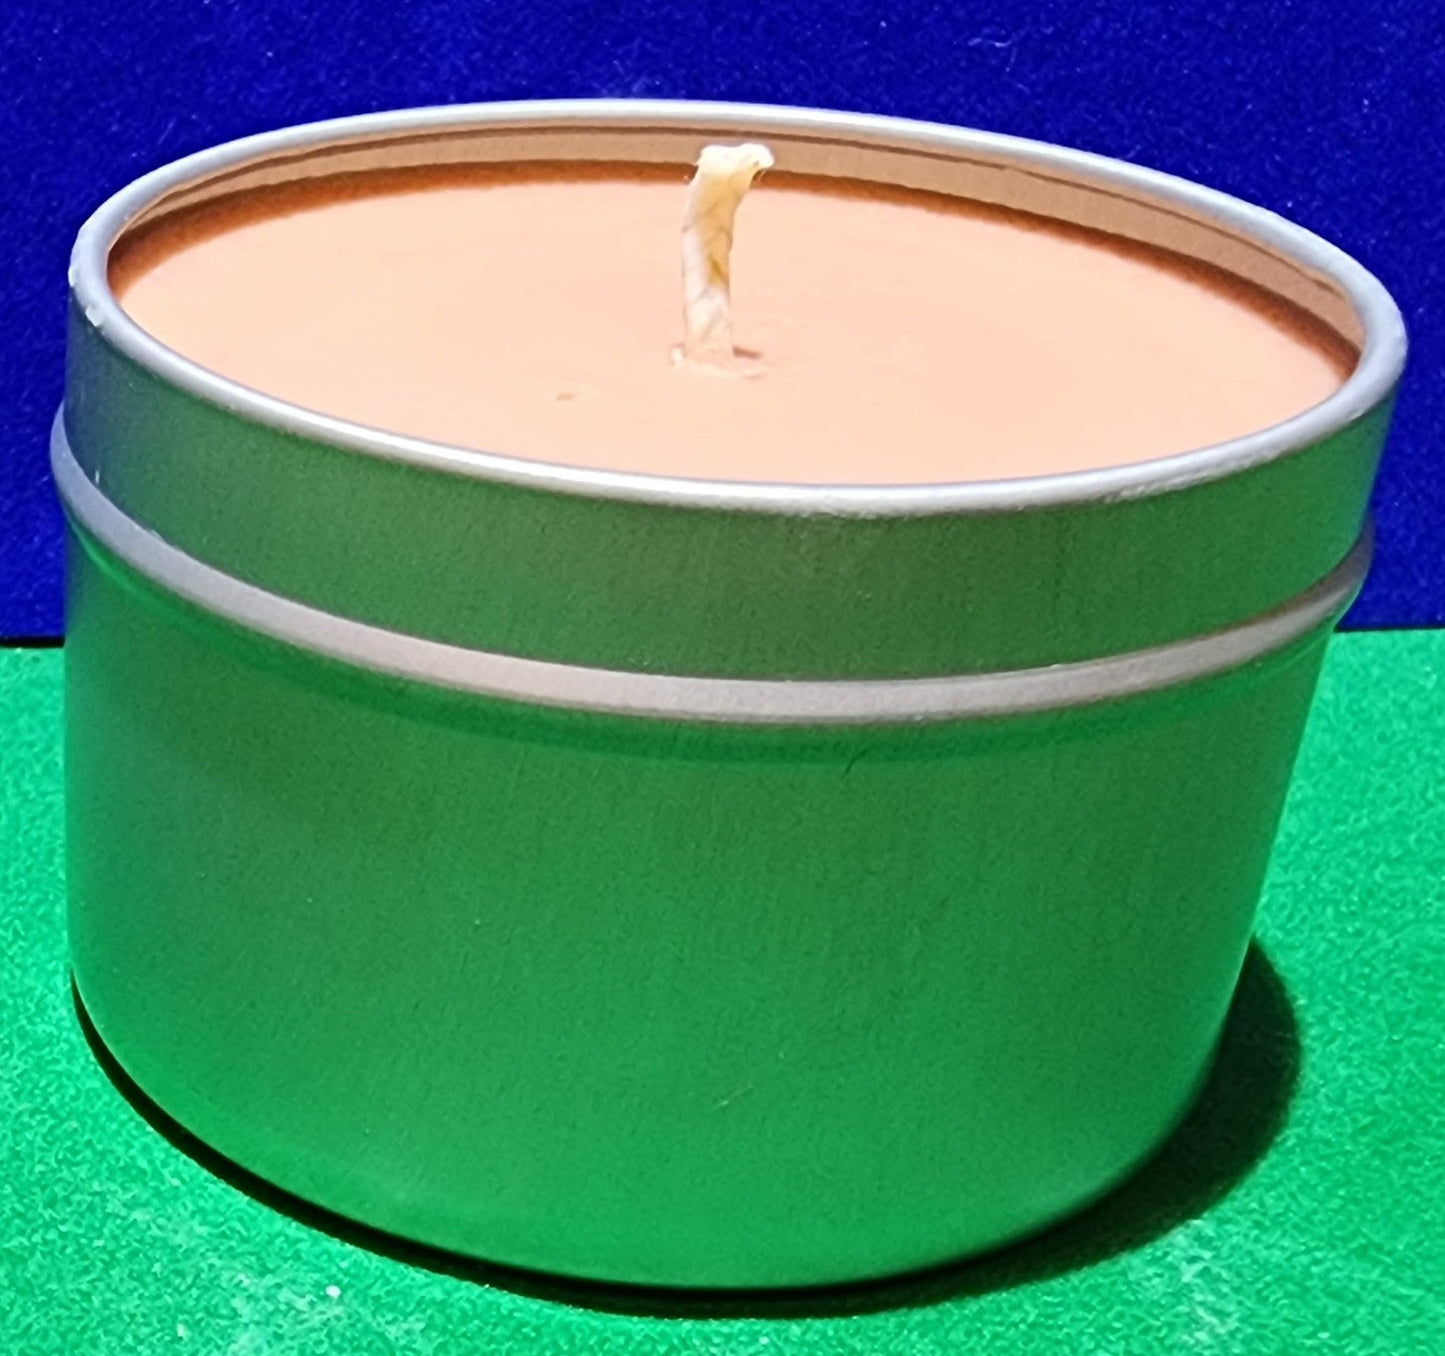 Sugar & Spice Soy Candles & Wax Melts